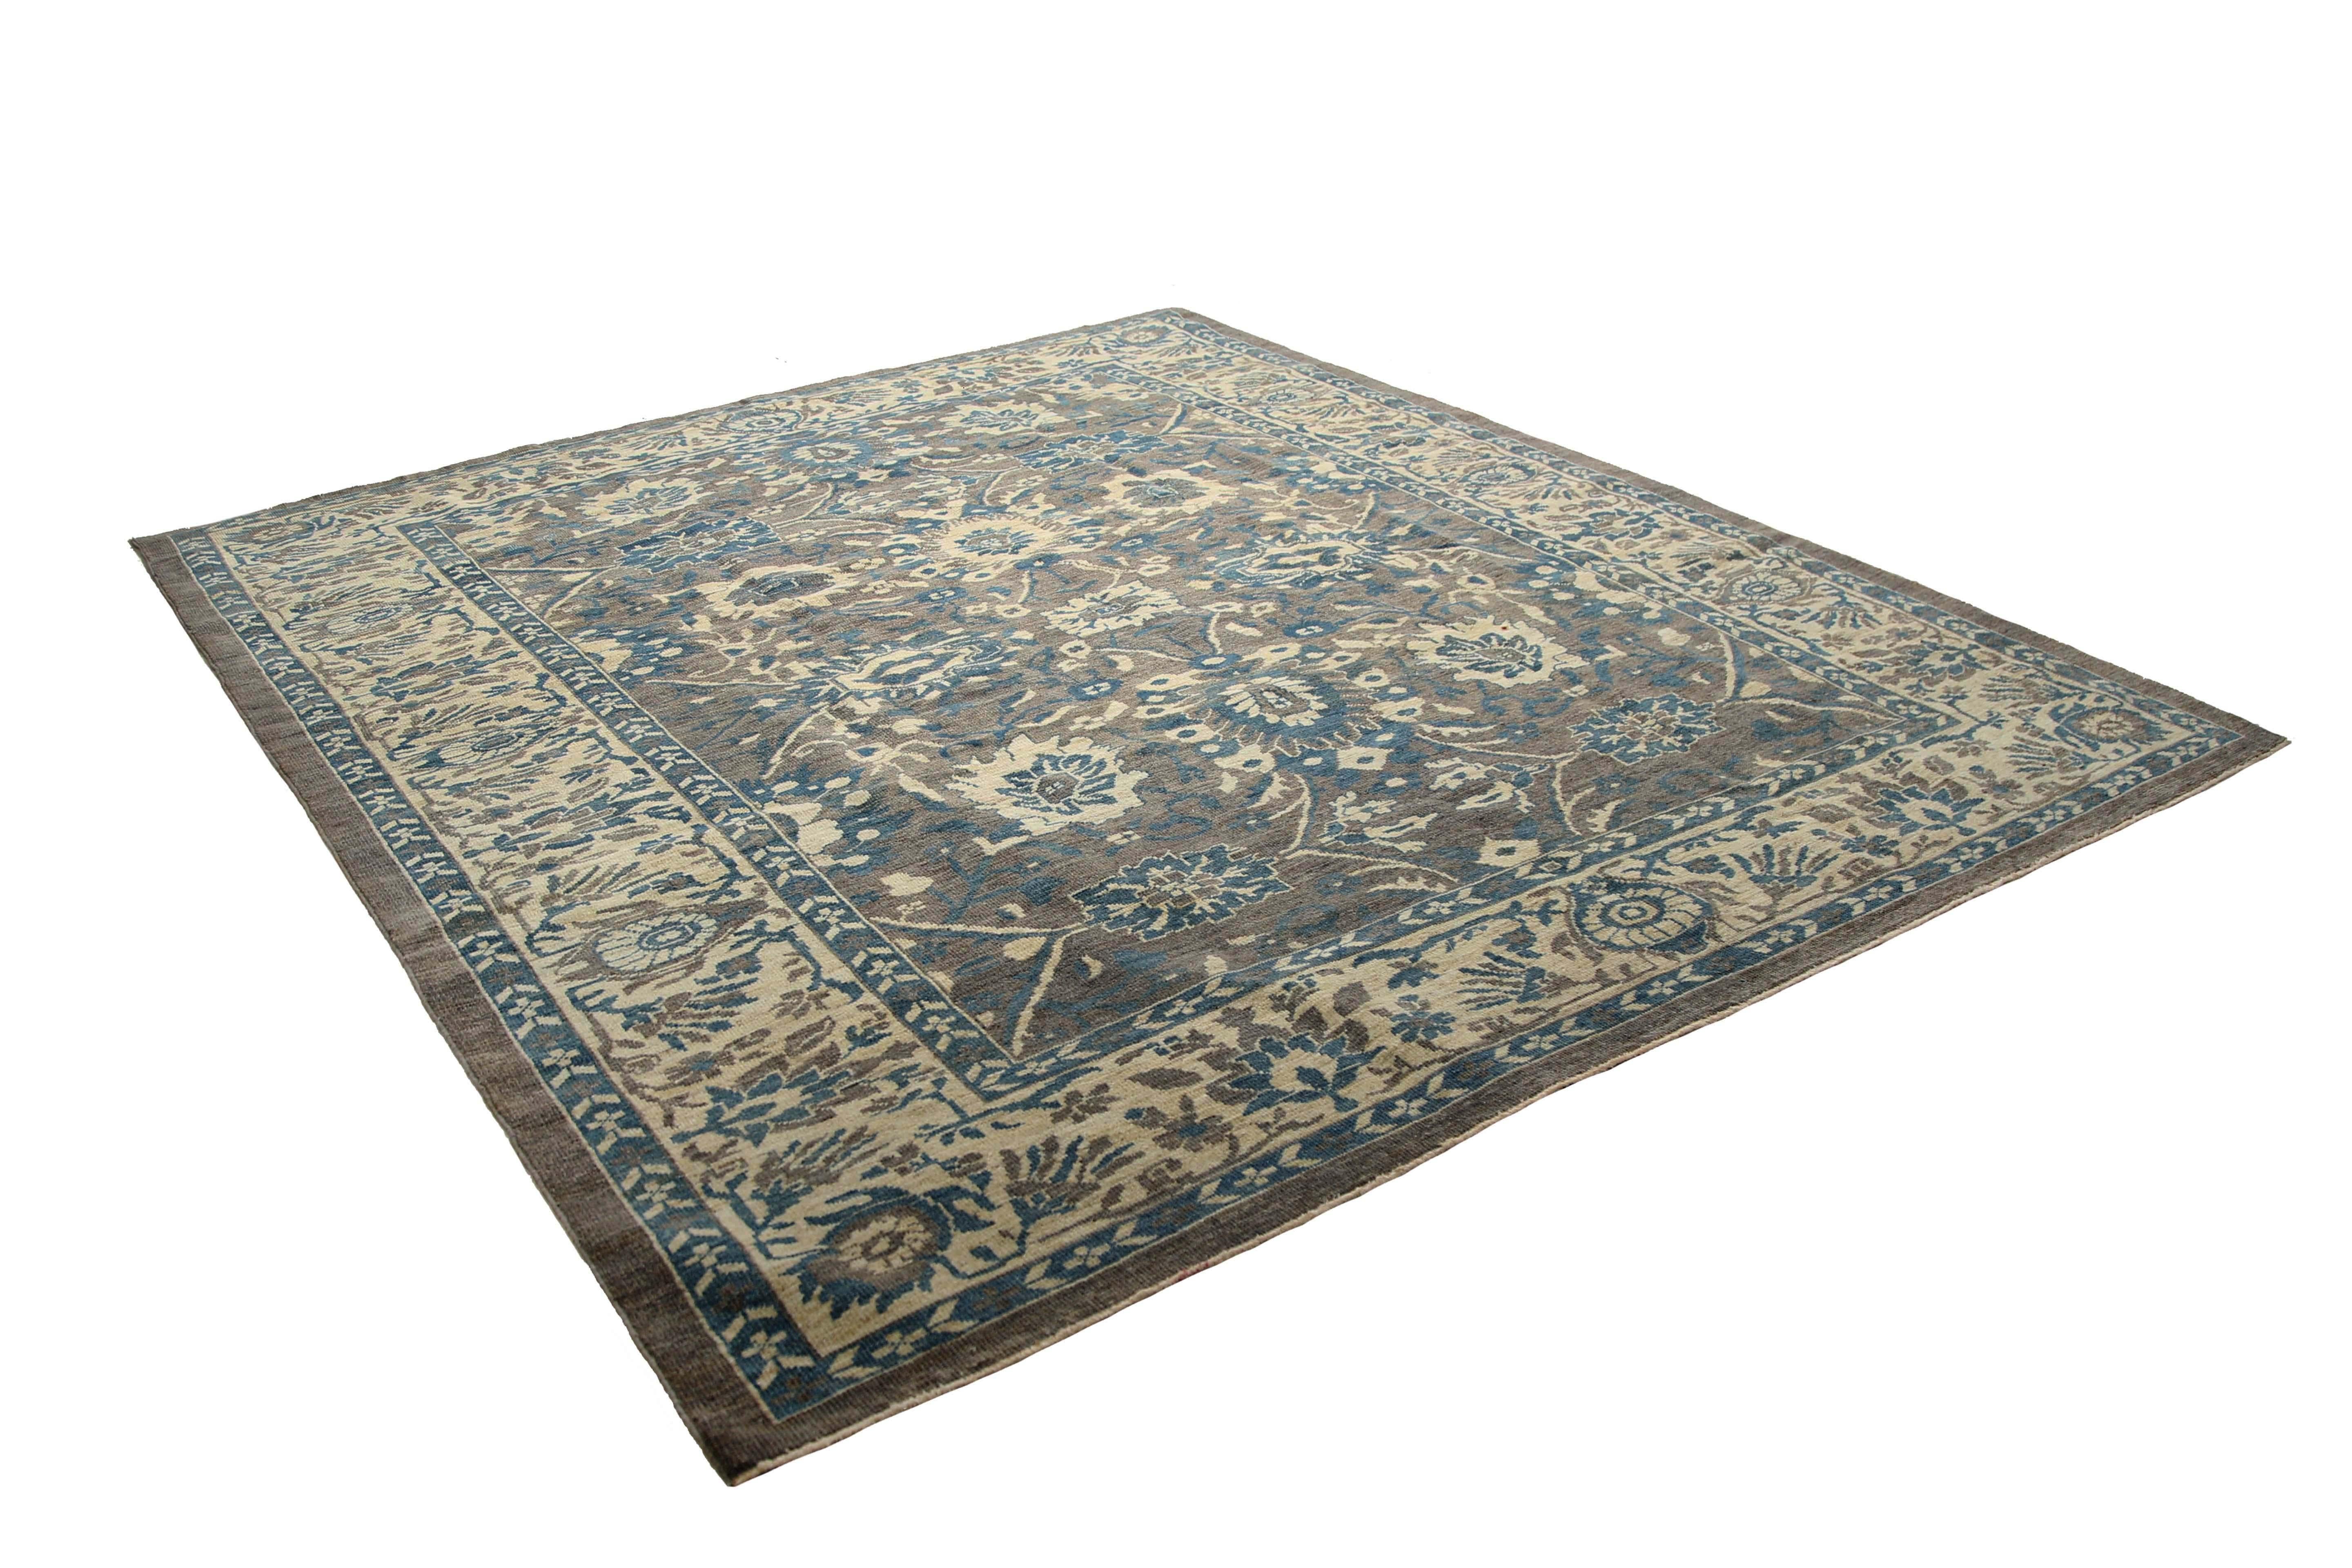 Luxurious Handmade Sultanabad Rug - Traditional Design, Blue, Grey, and Beige To For Sale 1